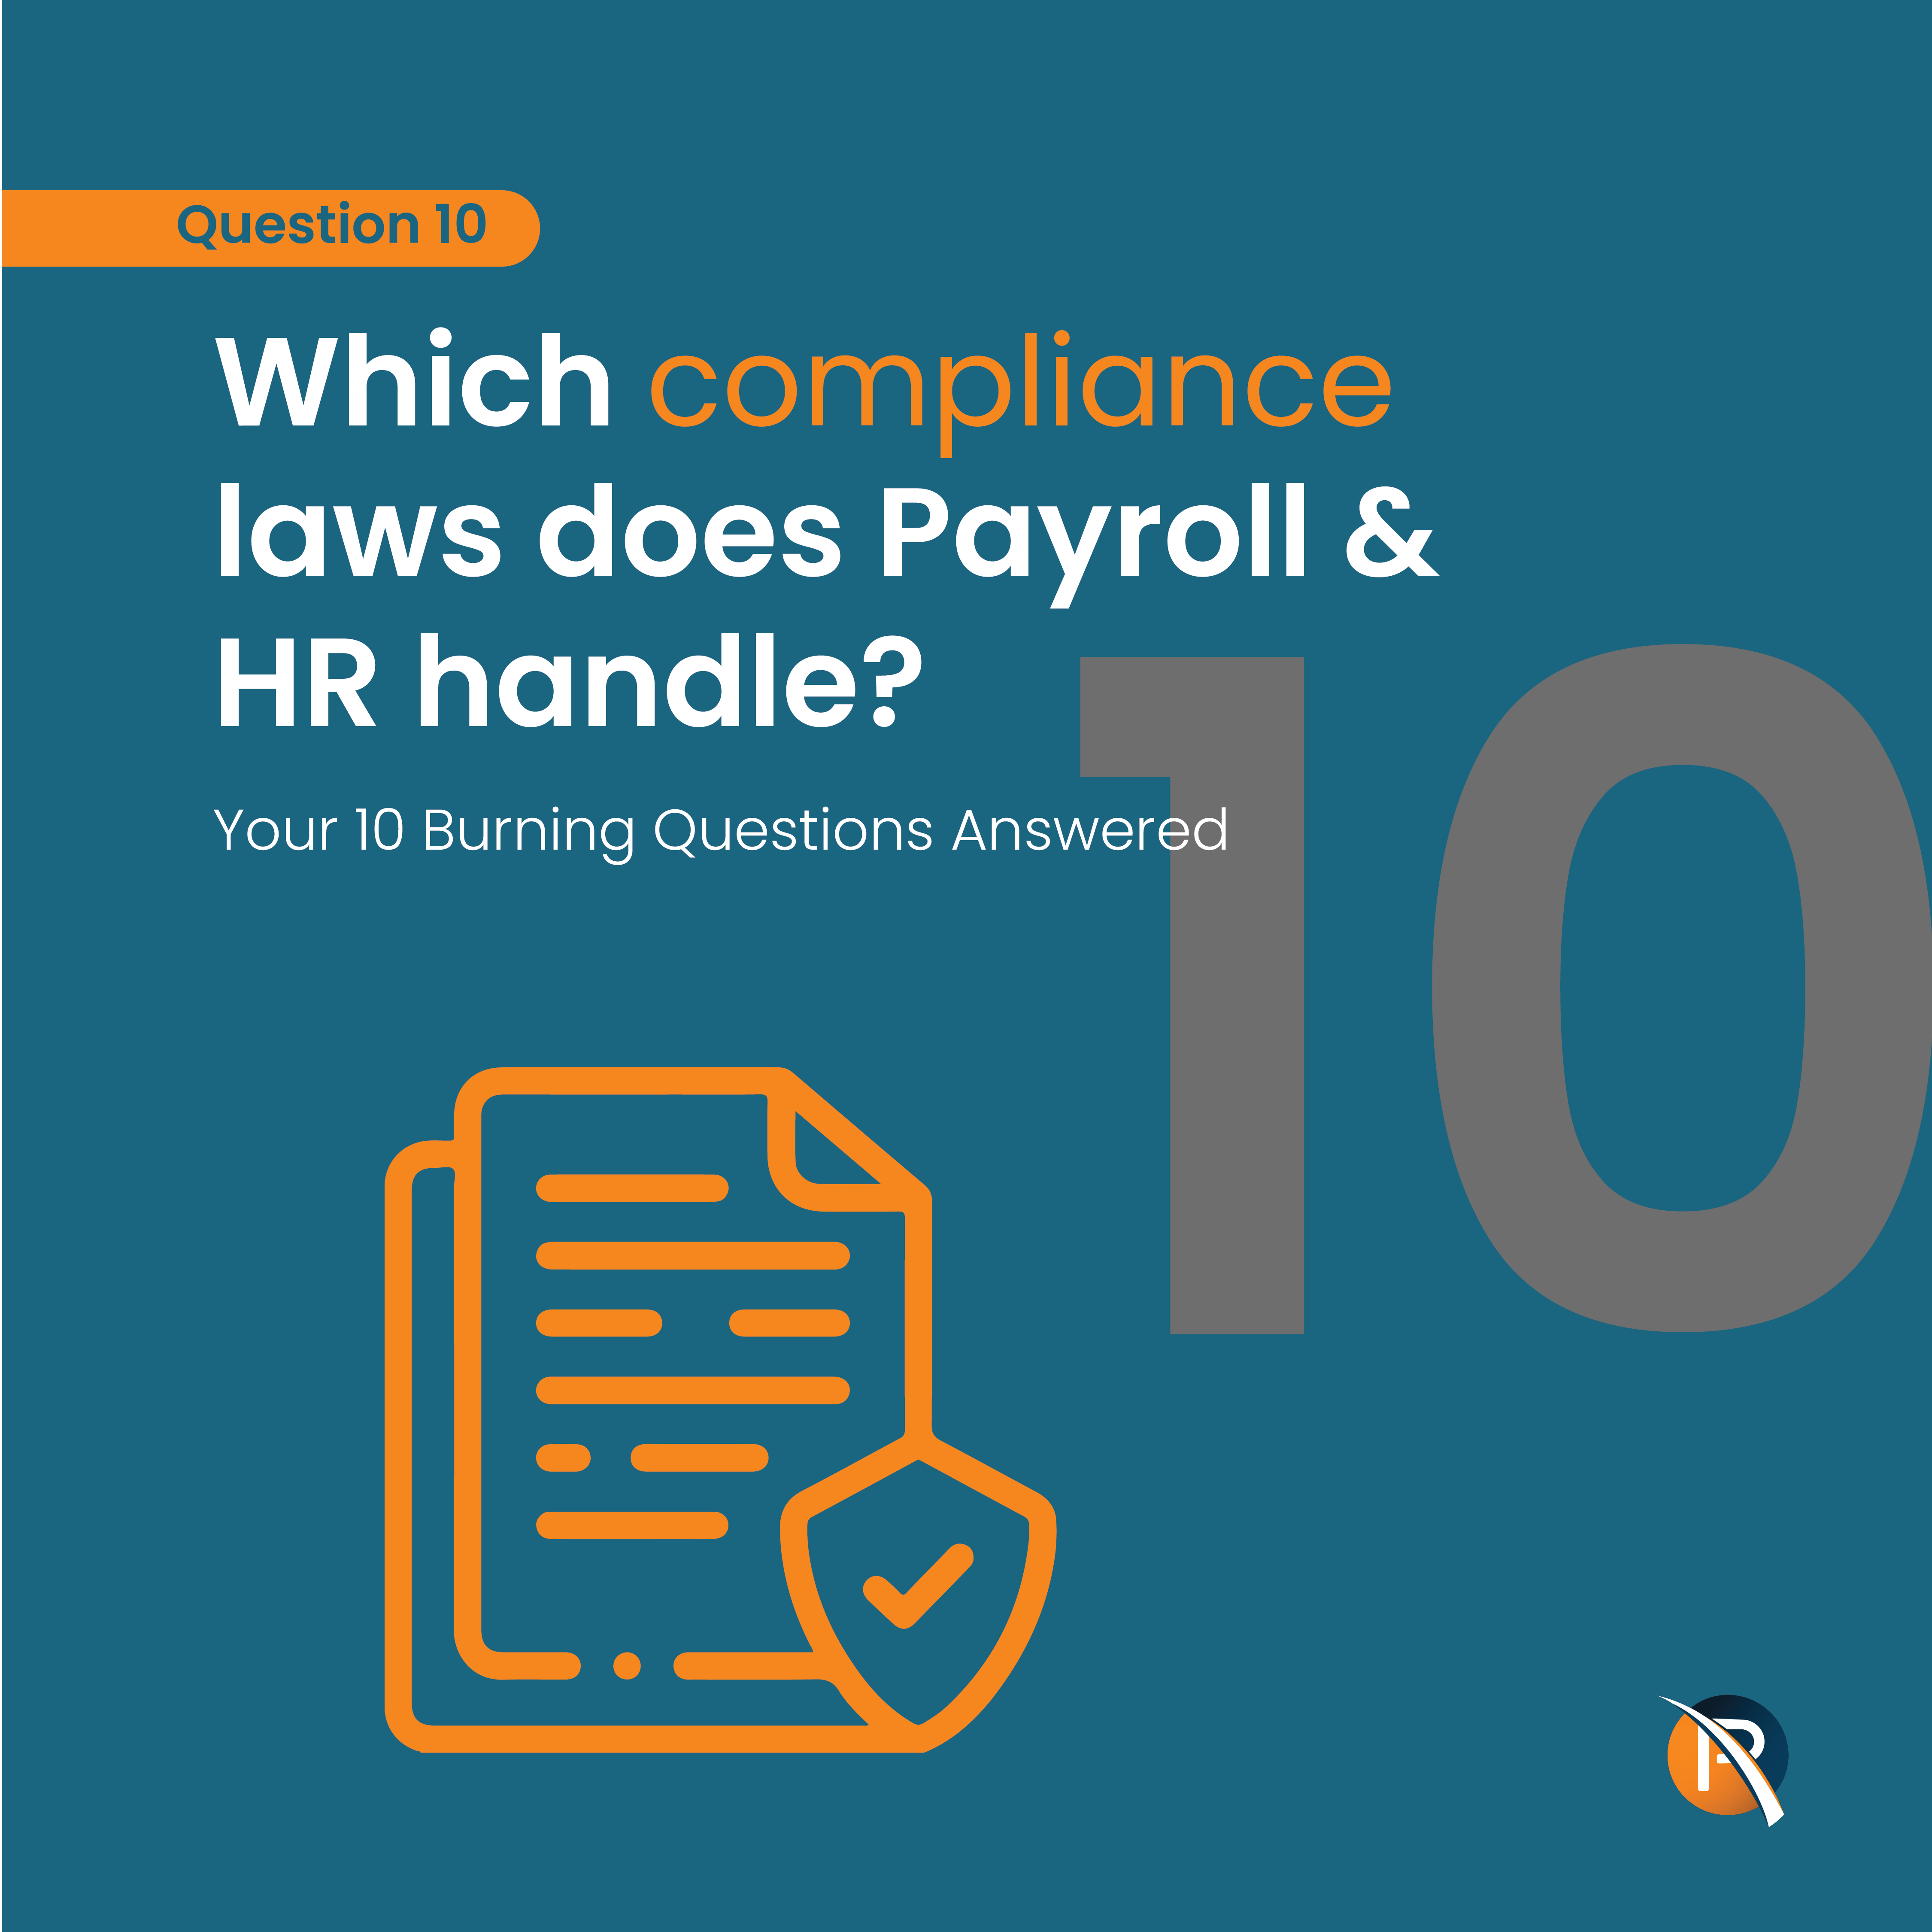 Payroll & HR Compliance Laws